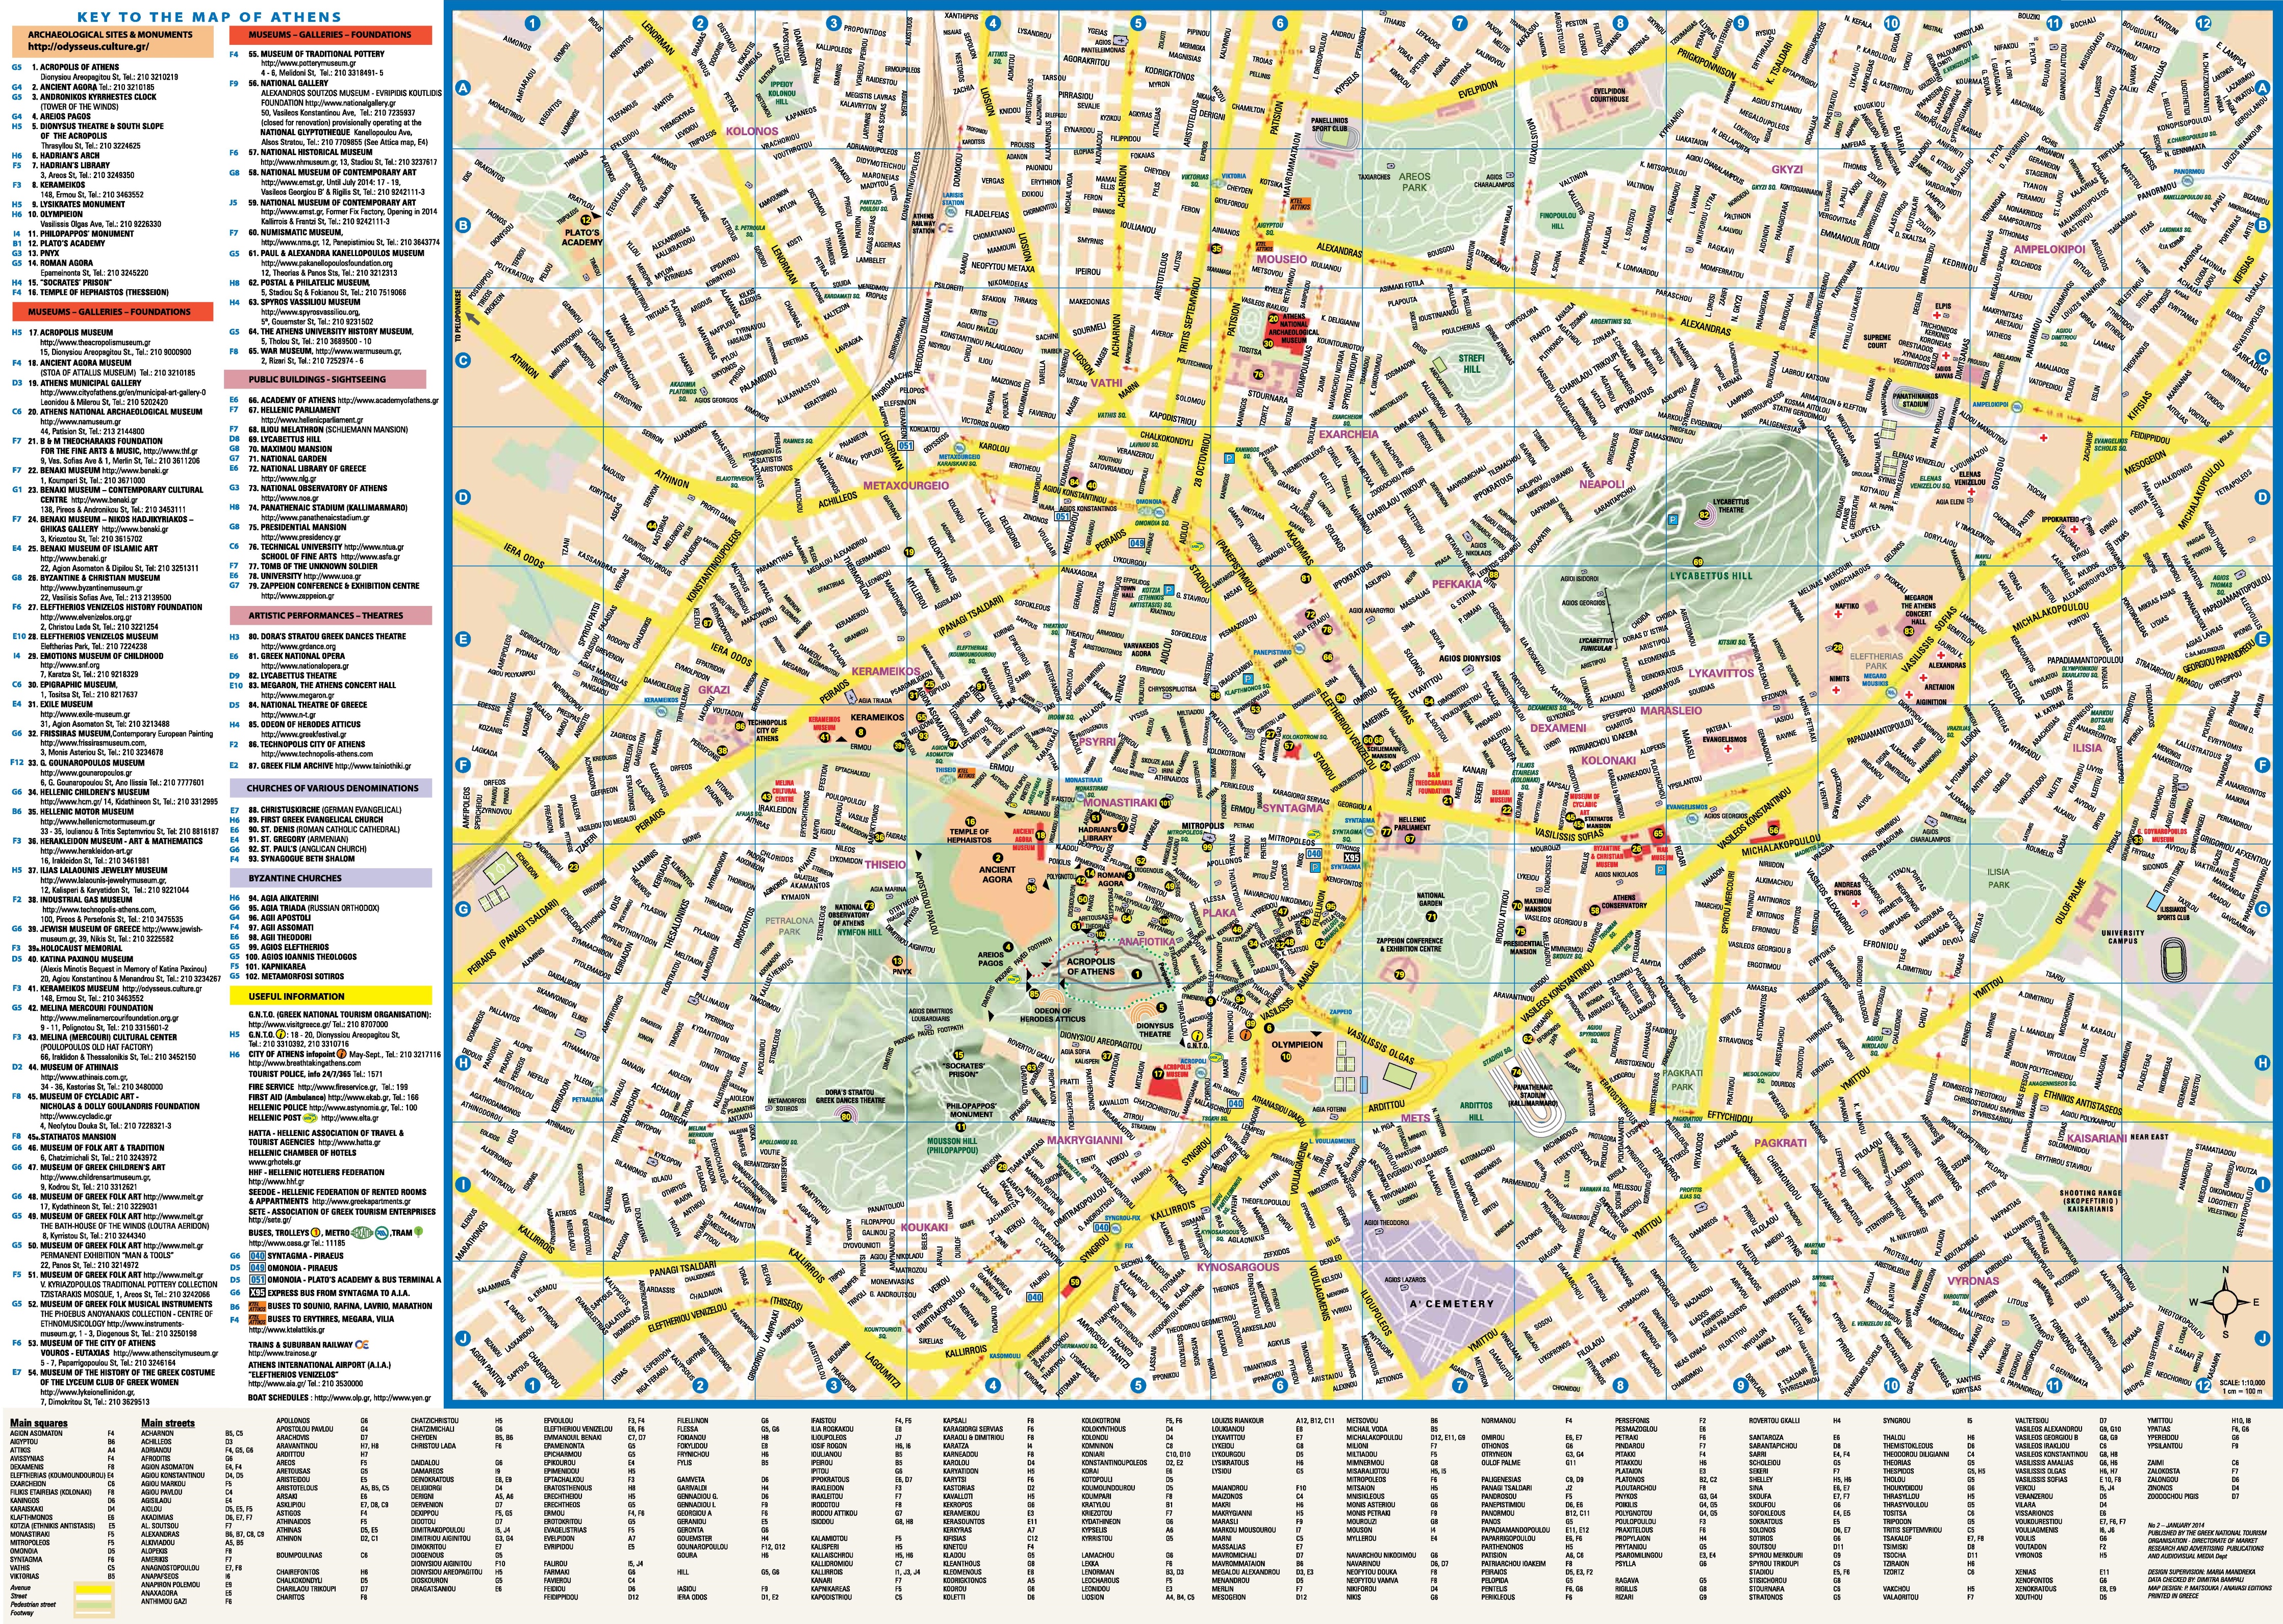 athens-tourist-attractions-map.jpg